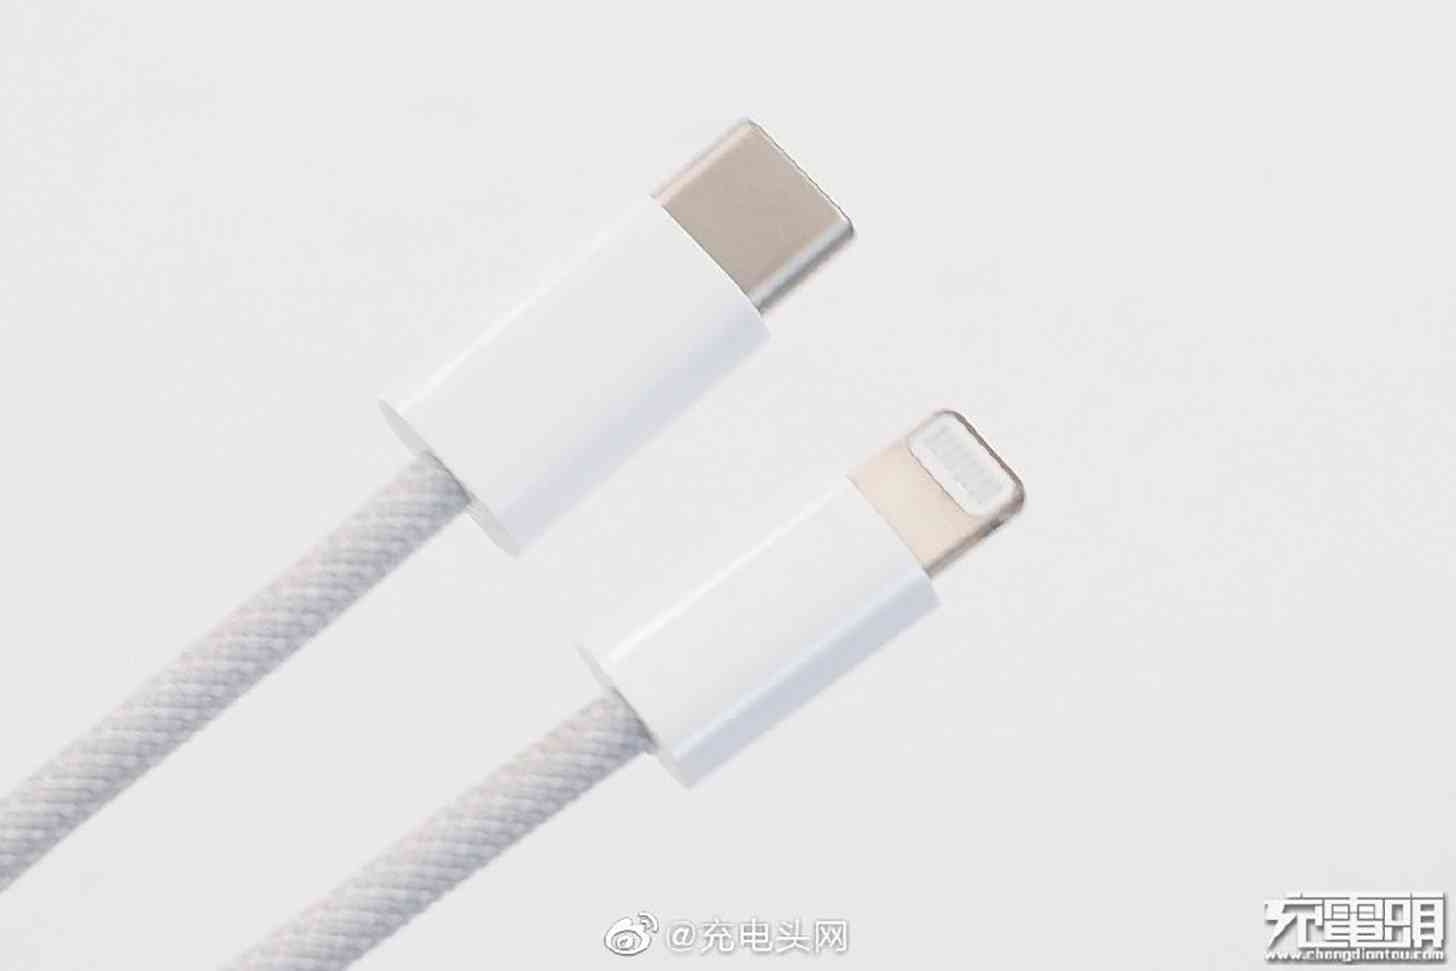 iPhone 12 braided Lightning to USB-C cable leak